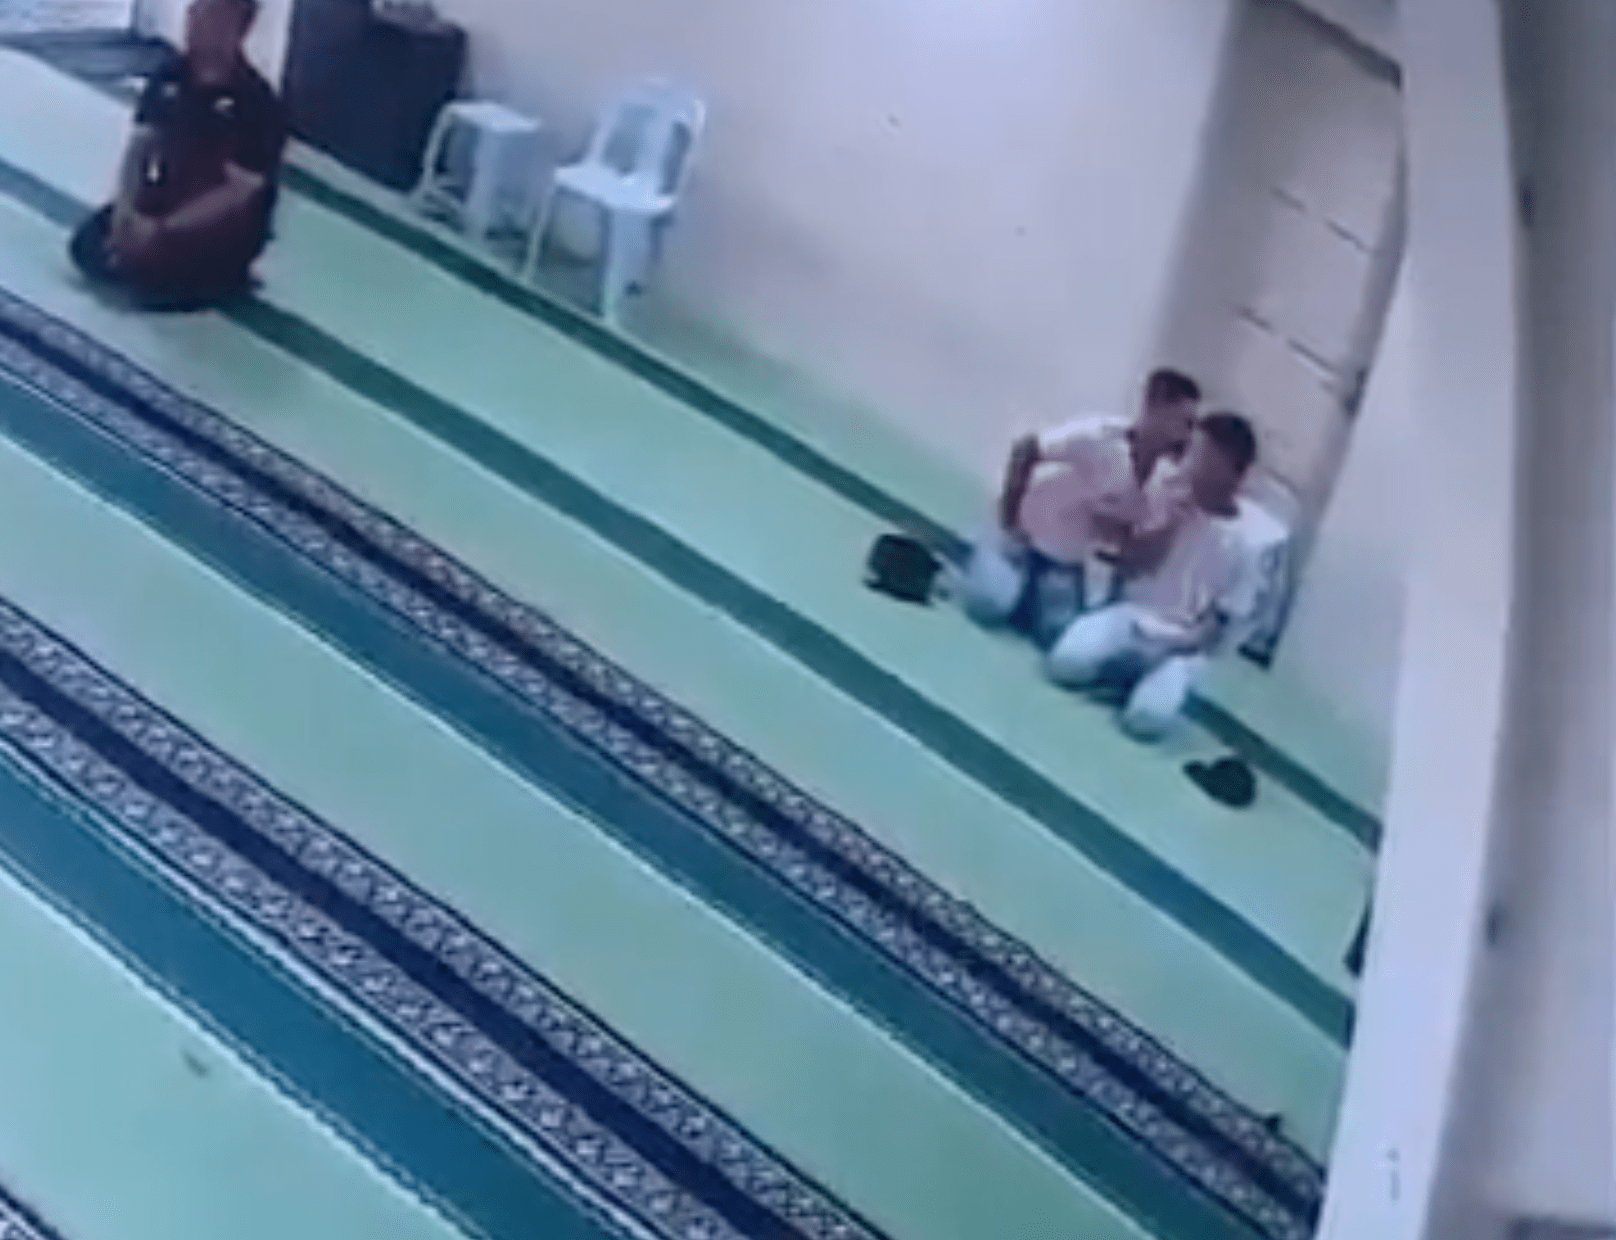 Two men caught kissing & touching each other inside banting mosque, police investigating | weirdkaya